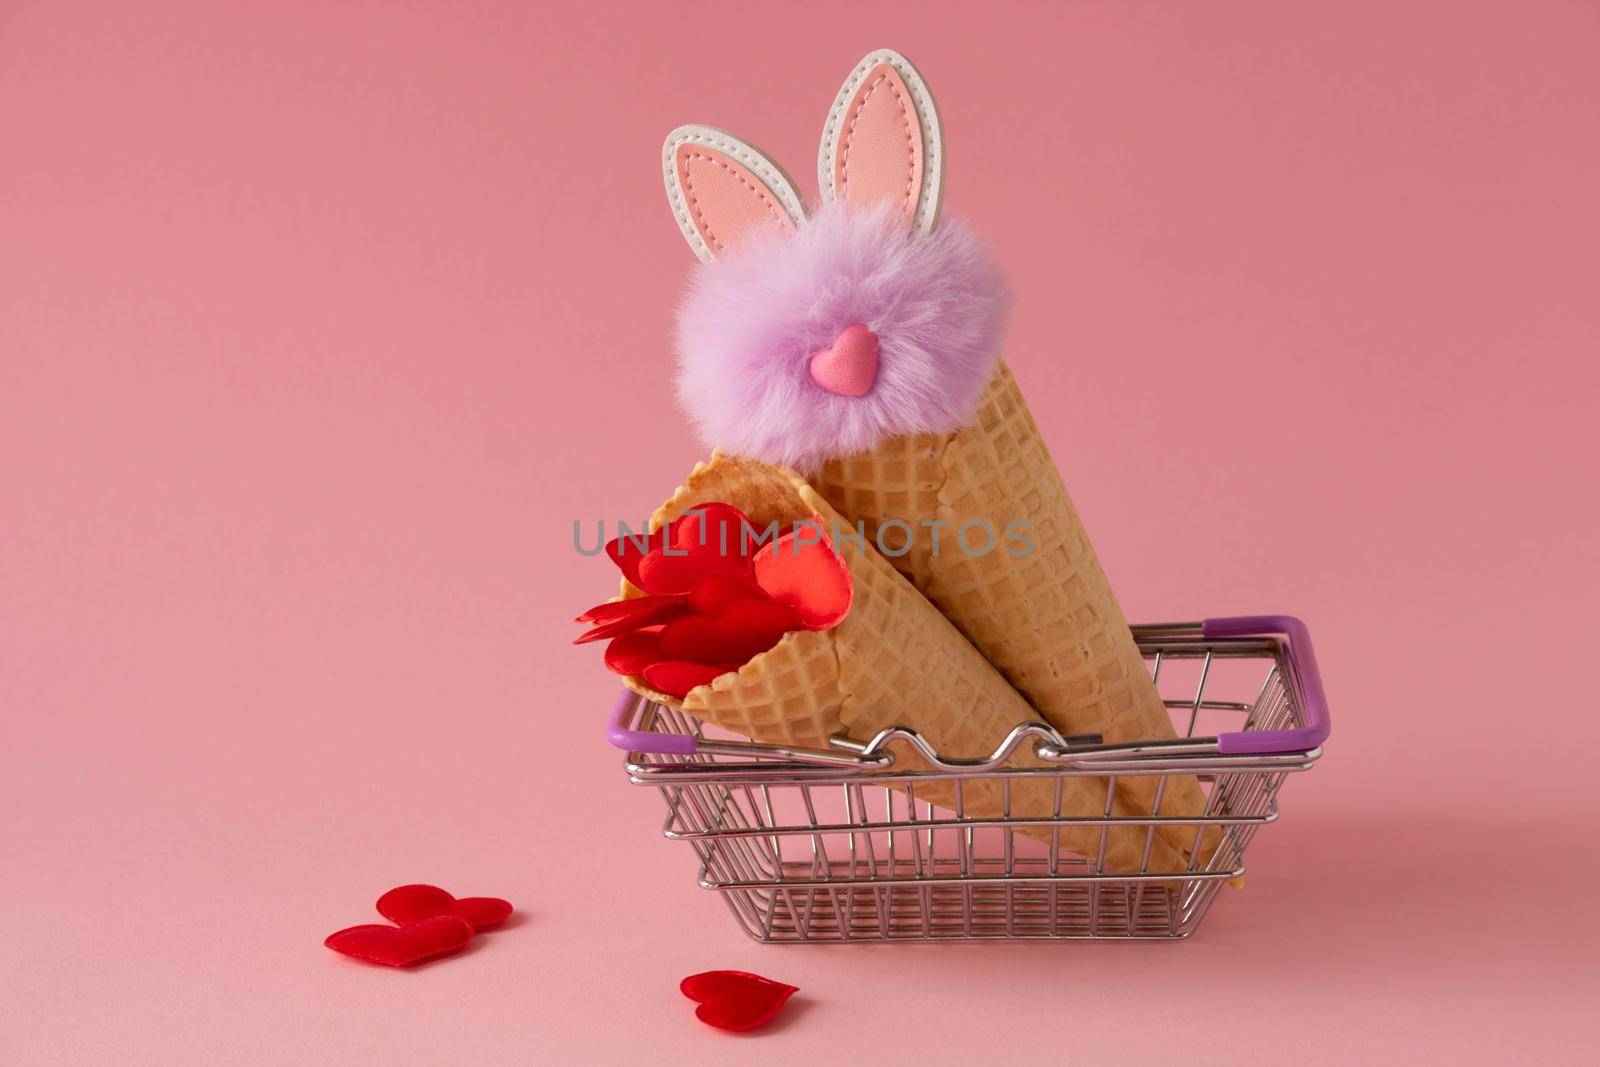 Abstract pink background with red hearts and a fluffy lilac rabbit in a grocery basket and waffle cones. The concept of love, a greeting card for Valentine's Day and Easter